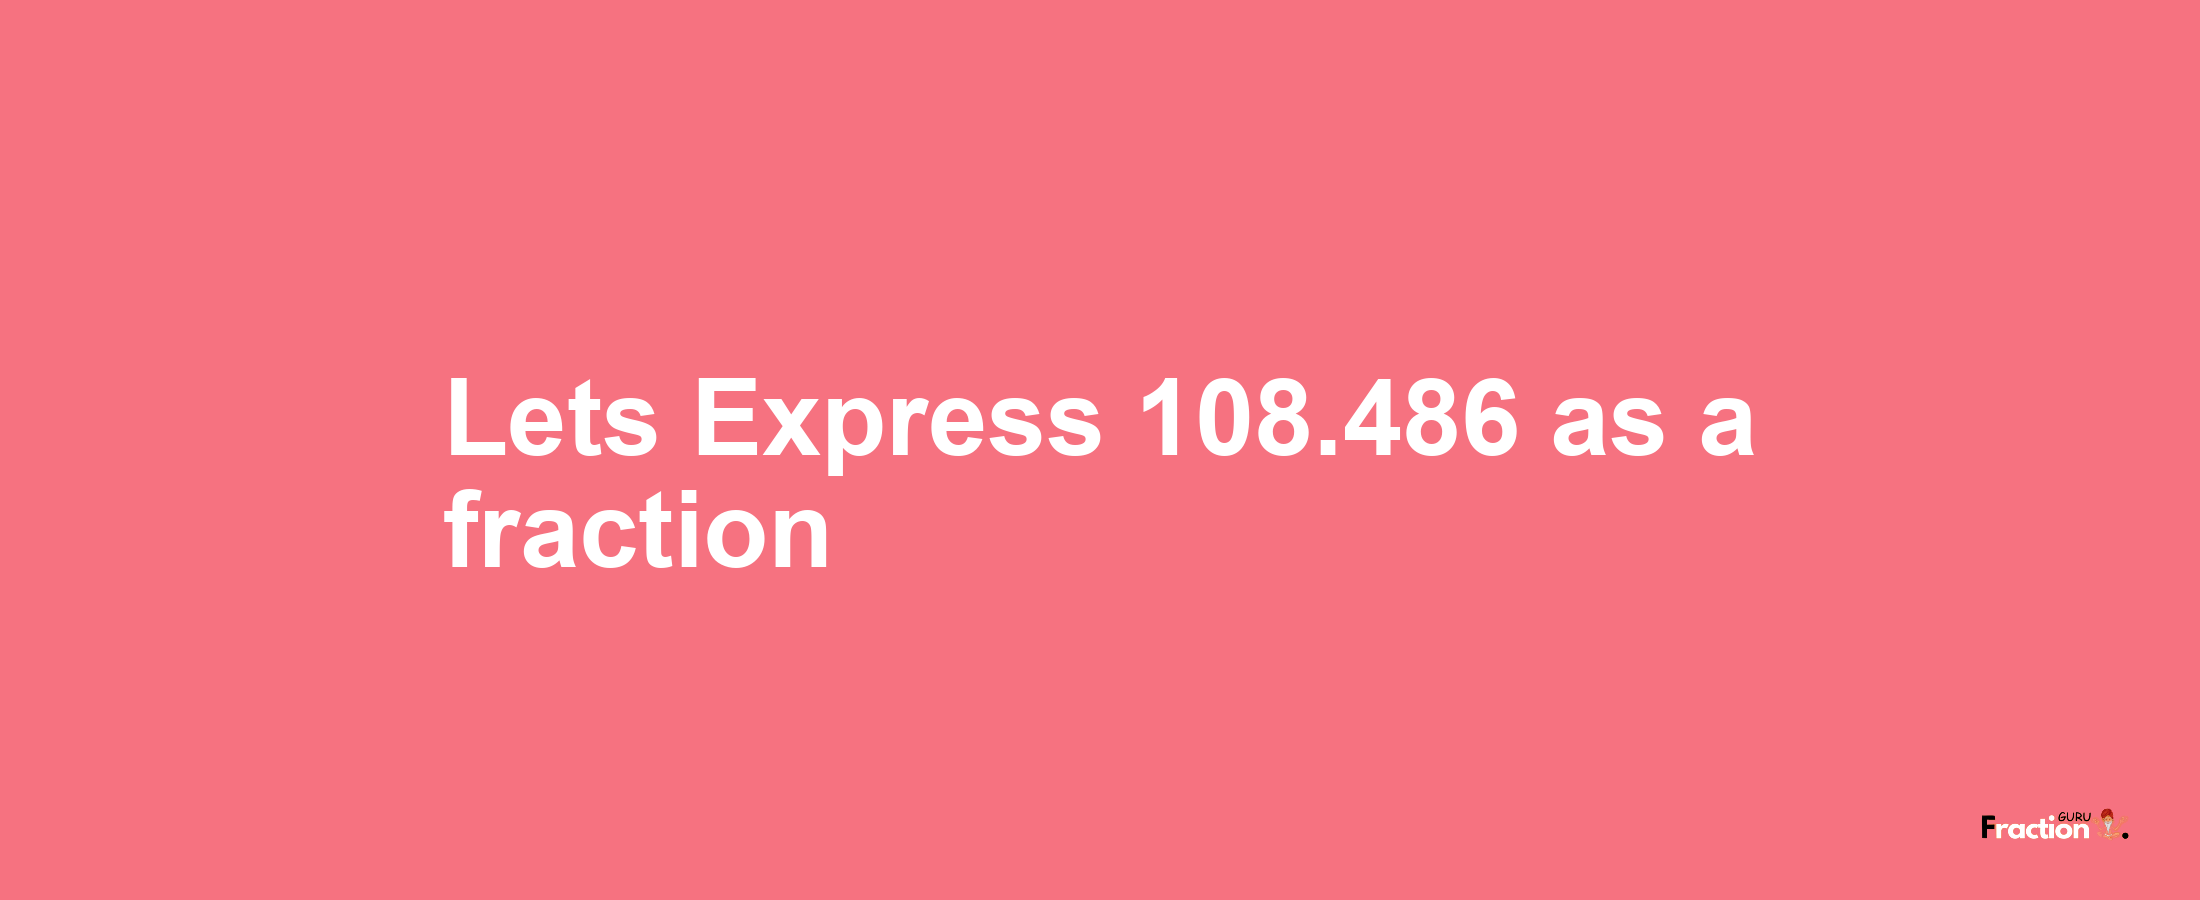 Lets Express 108.486 as afraction